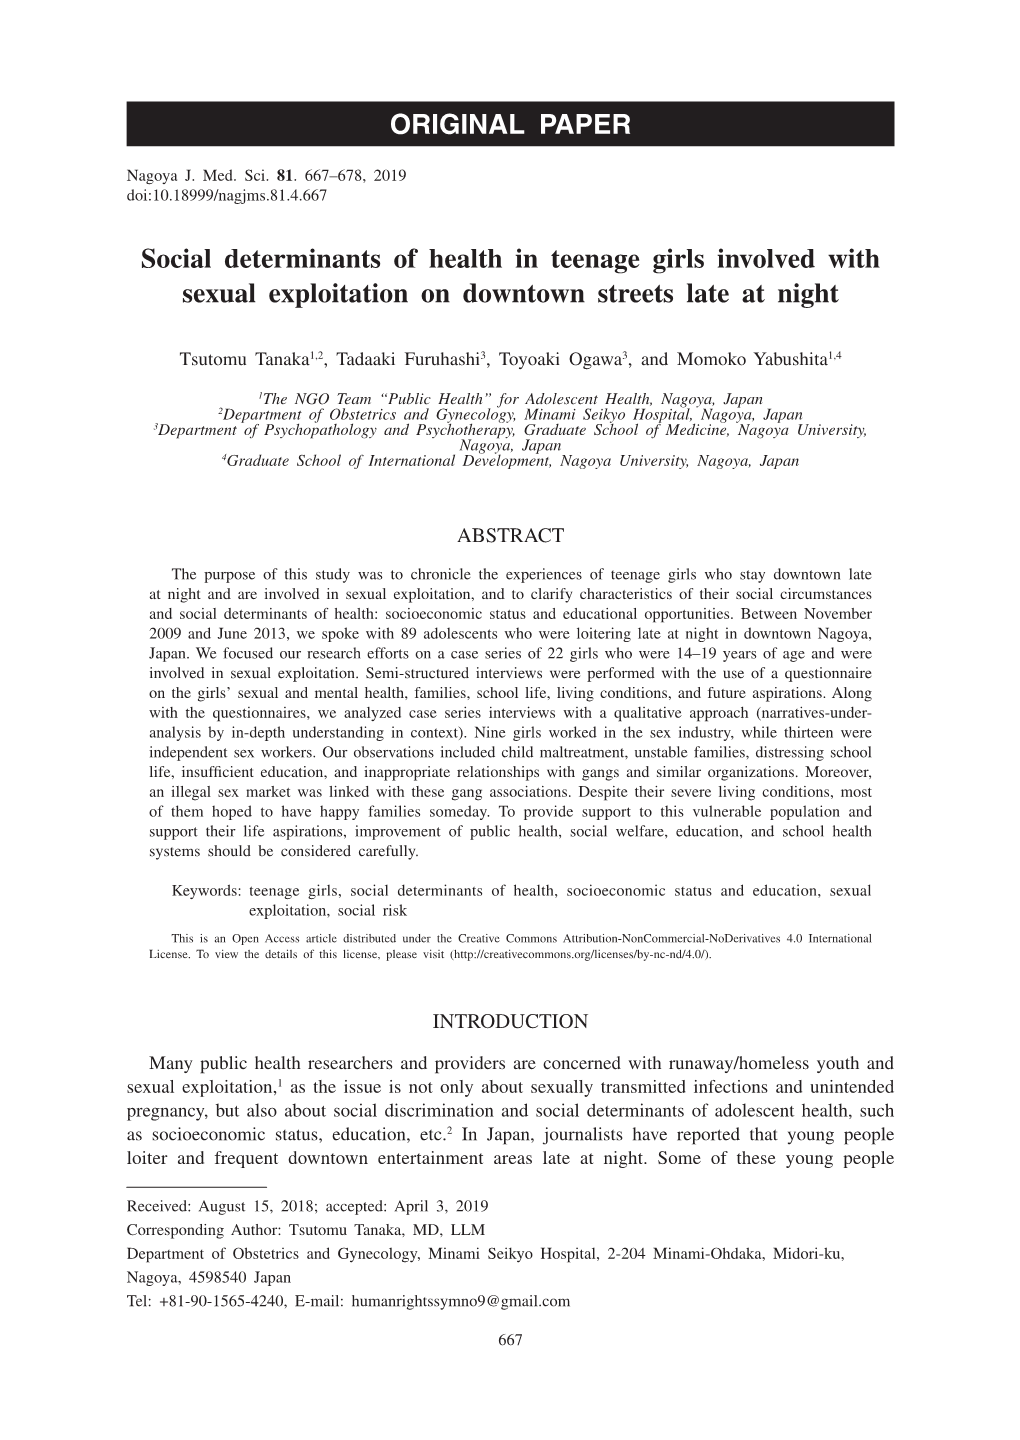 Social Determinants of Health in Teenage Girls Involved with Sexual Exploitation on Downtown Streets Late at Night